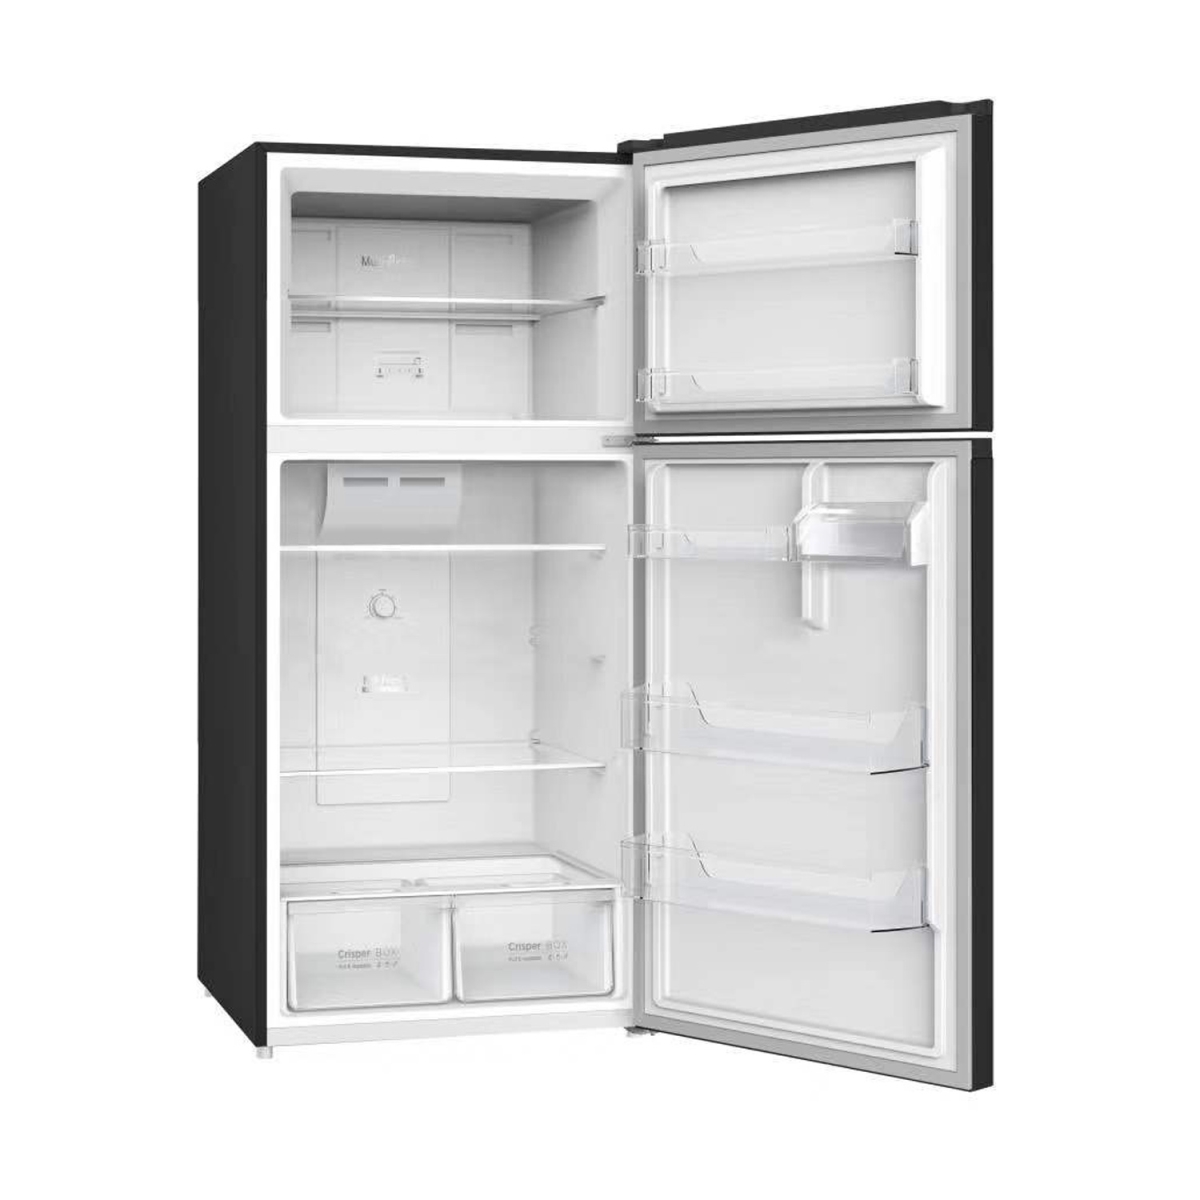 -conserv Atfr1801ese 18 Cu.ft. Top Freezer Apartment Refrigerator Stainless With Additional Ice Maker Kit